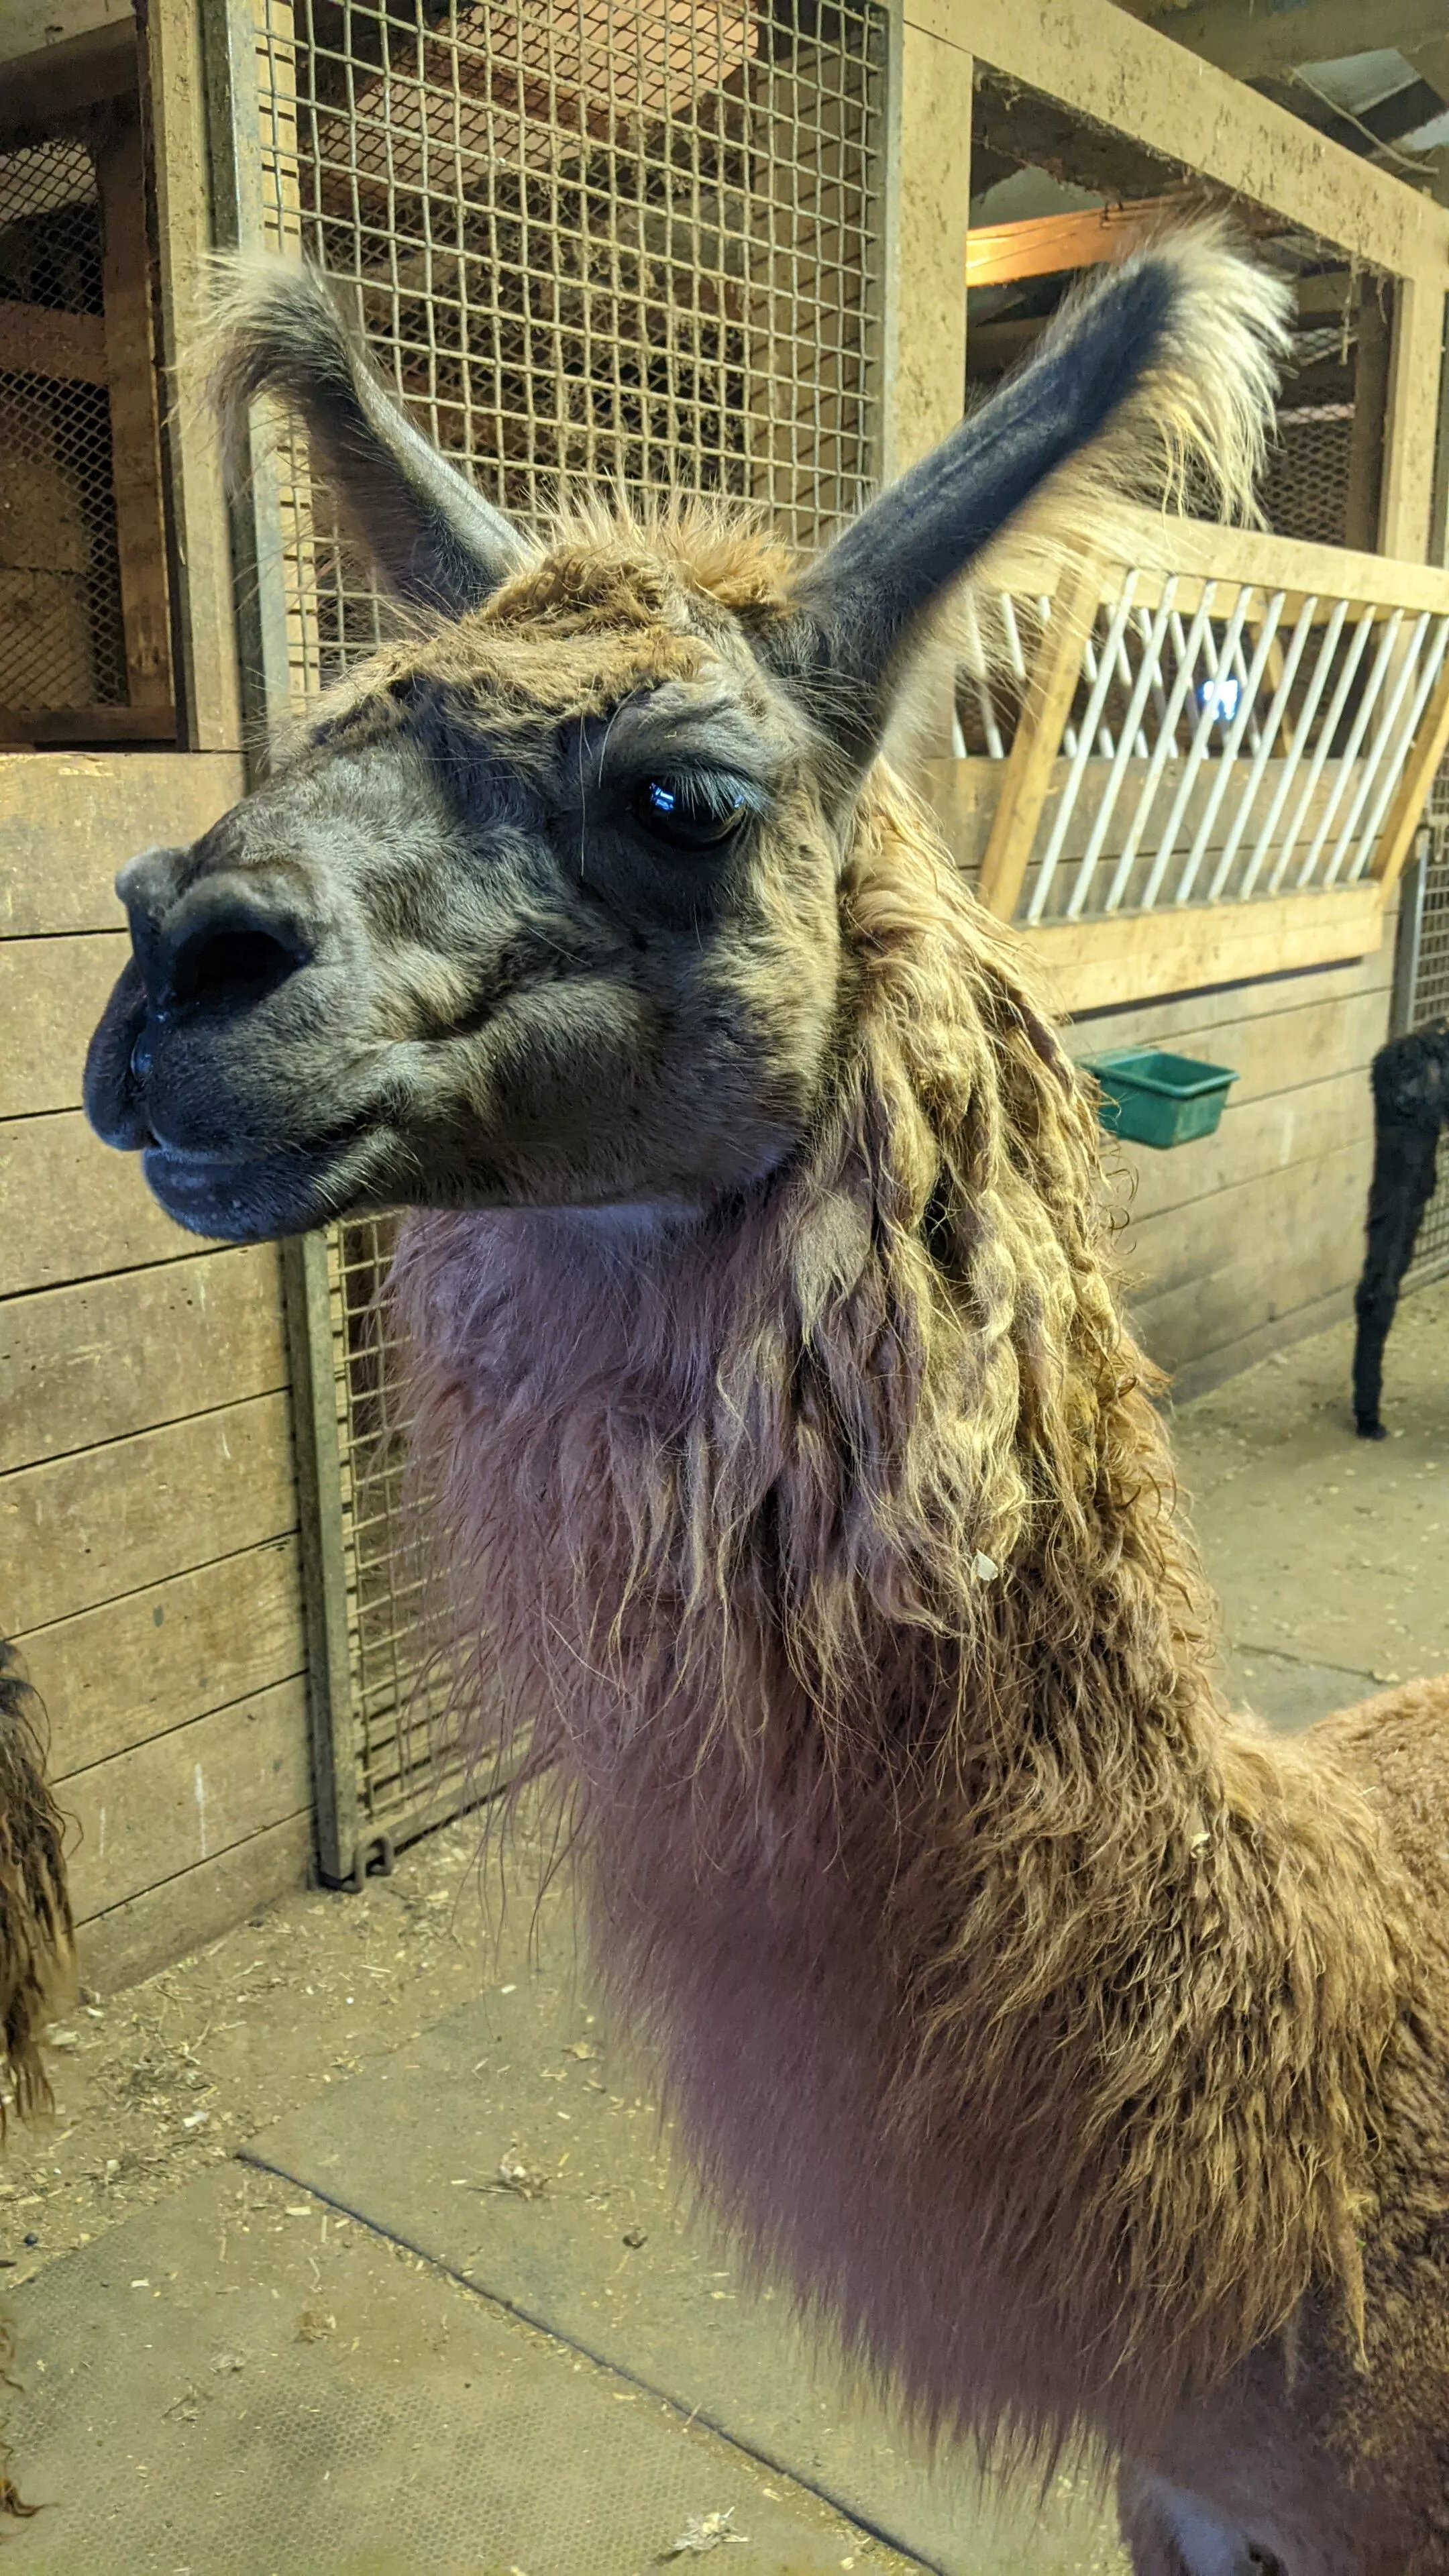 An image of a llama named Outsourced